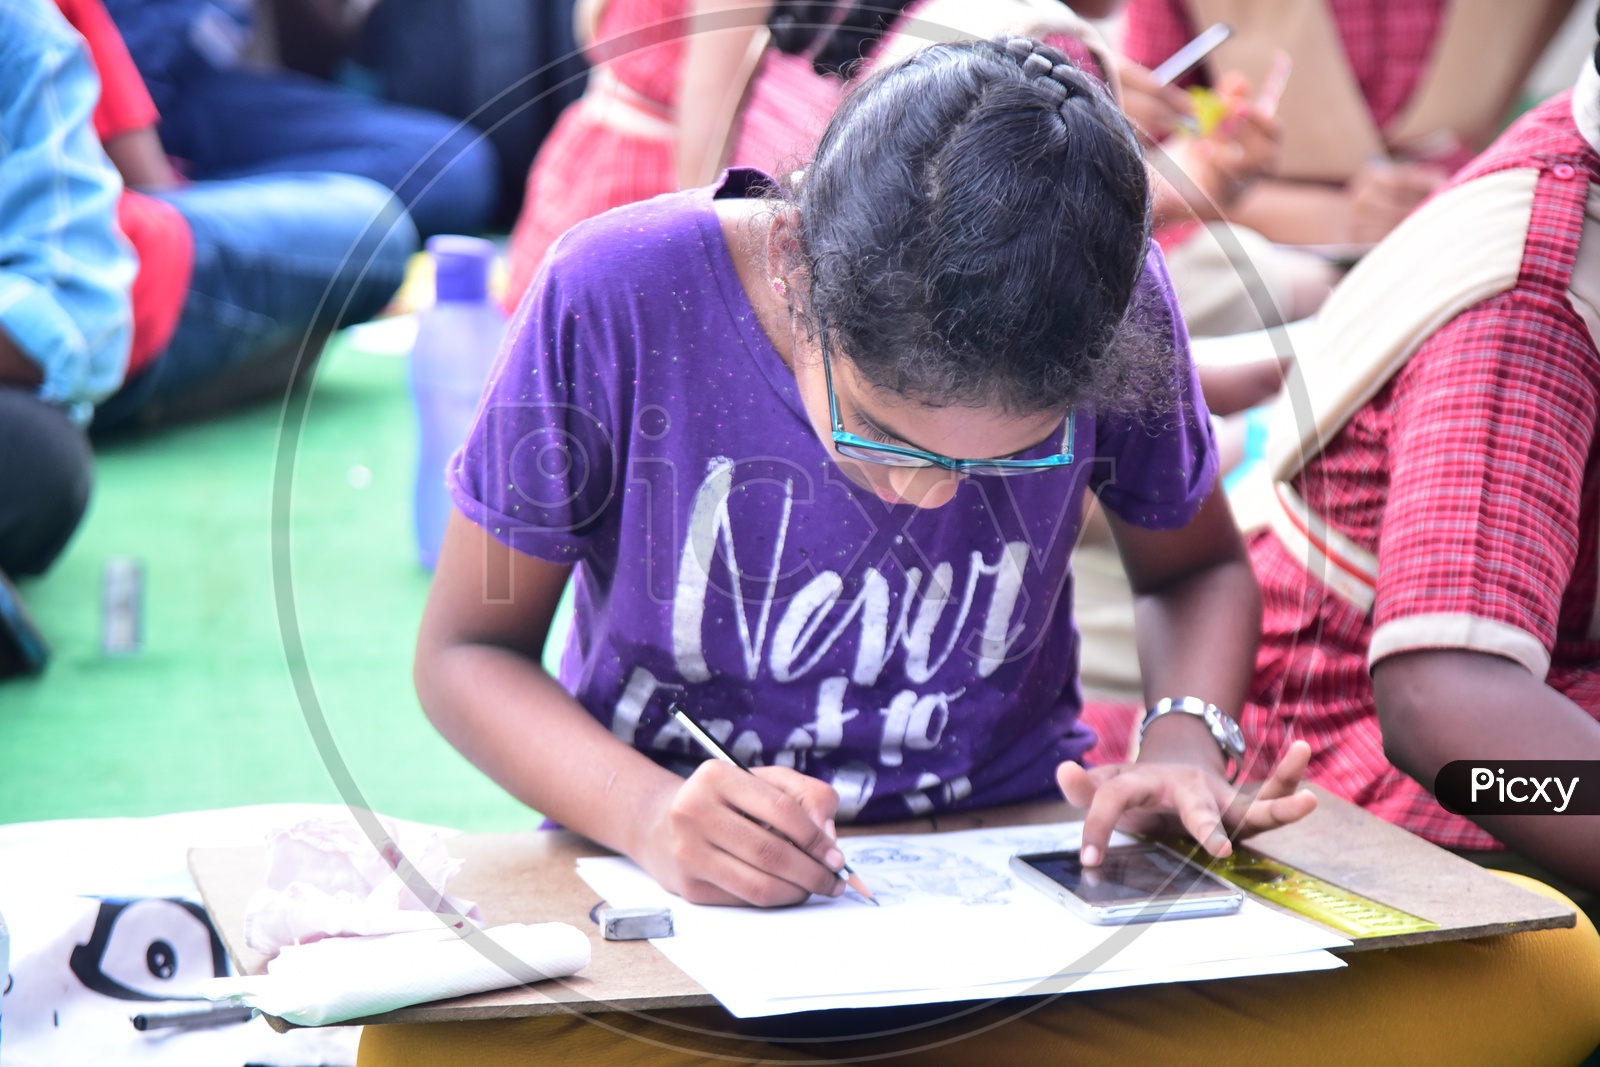 A school girl drawing a sketch using a cell phone during a competition